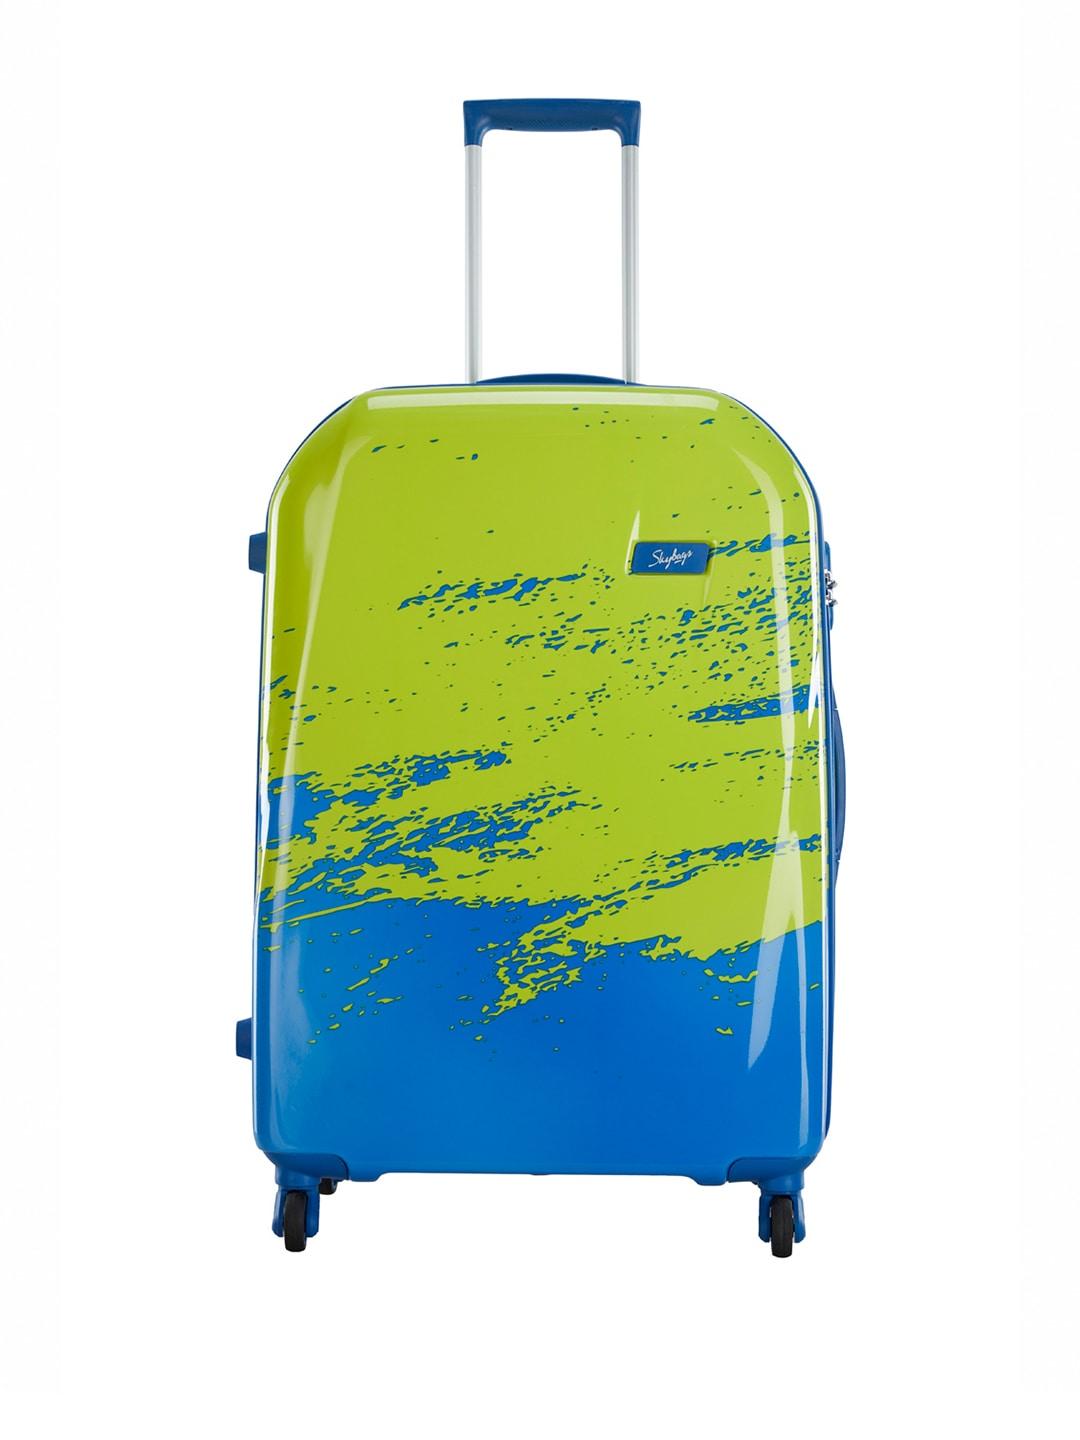 skybags green & blue horizon 75 360 large trolley suitcase